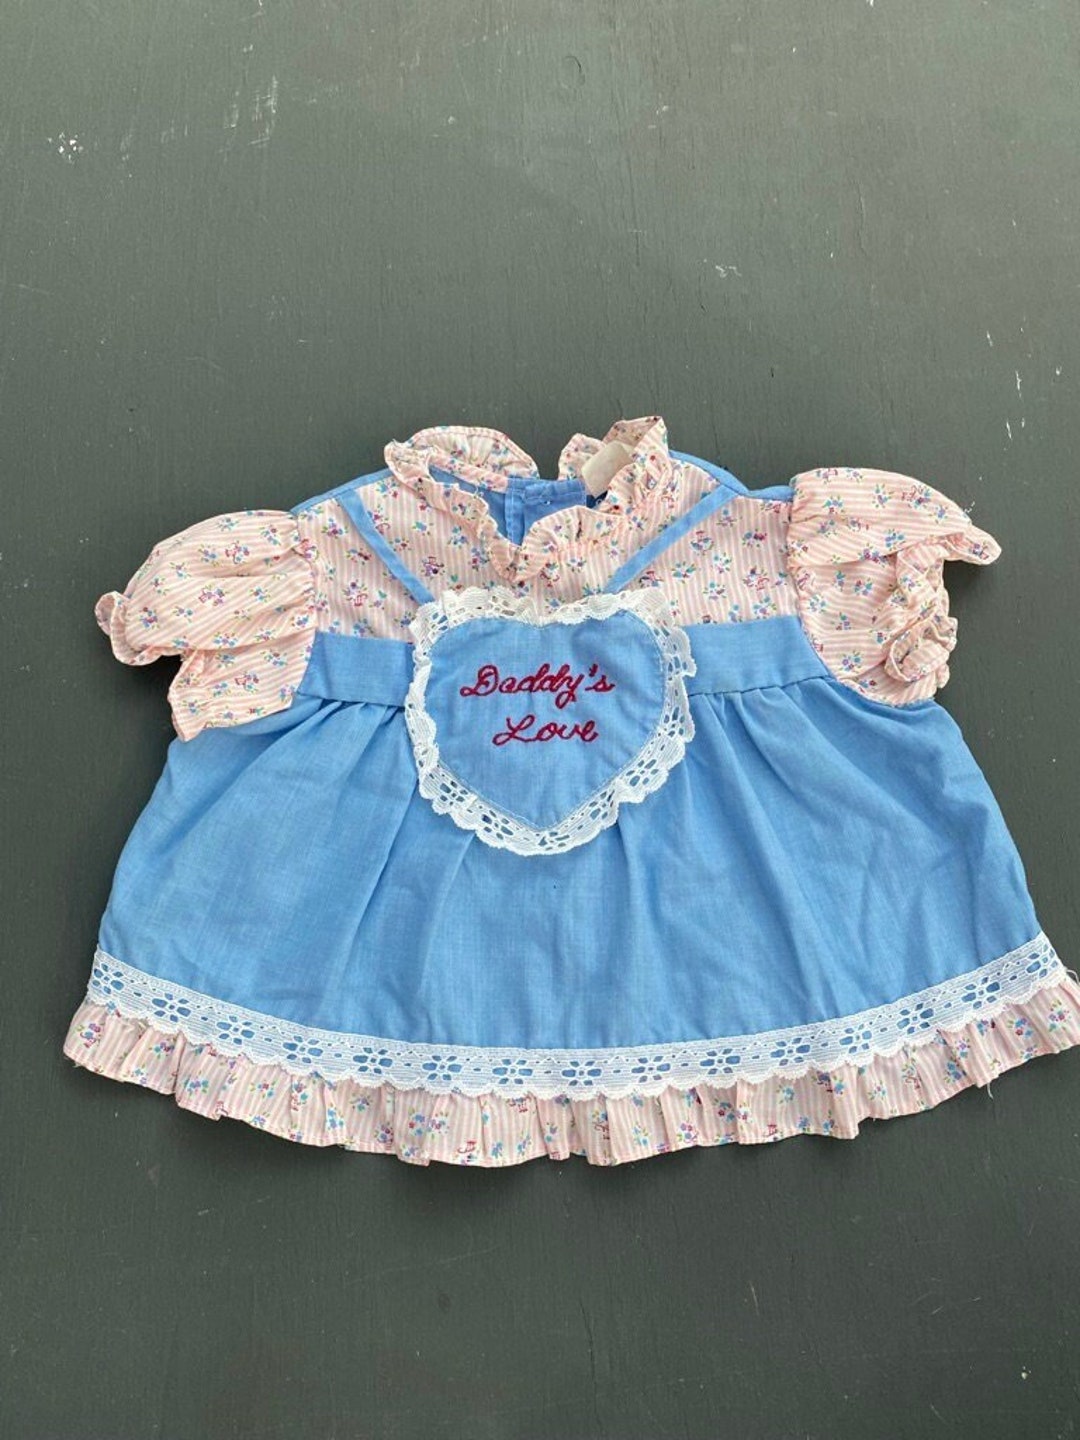 Vintage Baby 1980s Apron Heart Dress Little Girl Small - Etsy